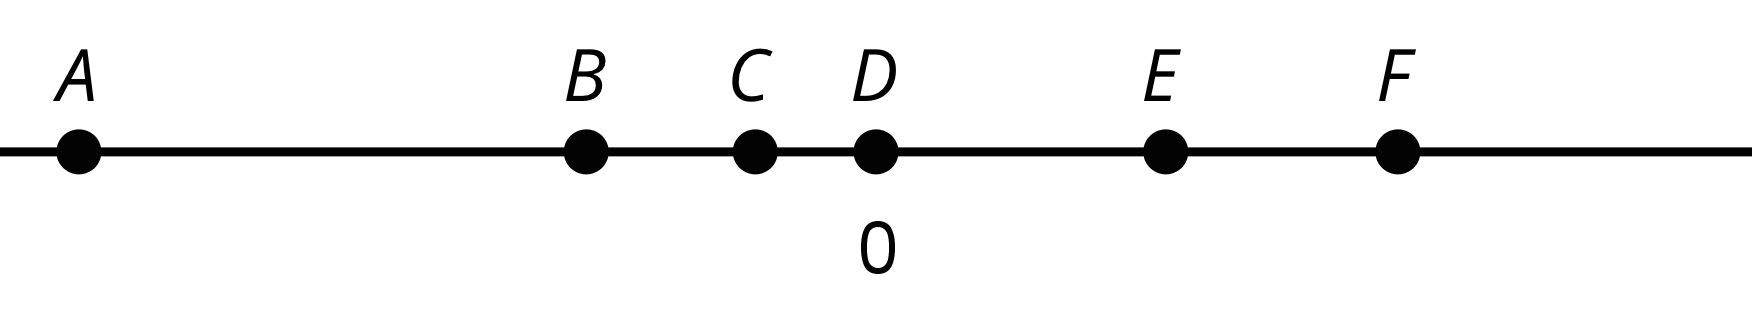 A number line with the number 0 indicated in the middle. Points A, B, C, D, E and F appear along the number line, with point D indicated at 0. Points A and F are located on opposite sides of point D with point A far to the left and point F far to the right of point D with Point F being closer to point D than point A. Point B is located less than halfway between point A and point D. Point C is located about halfway between the points B and D with it being closer to point D. Point E is located about halfway between points D and F with it being closer to point F. Points B and E are located about an equal distance from point D.